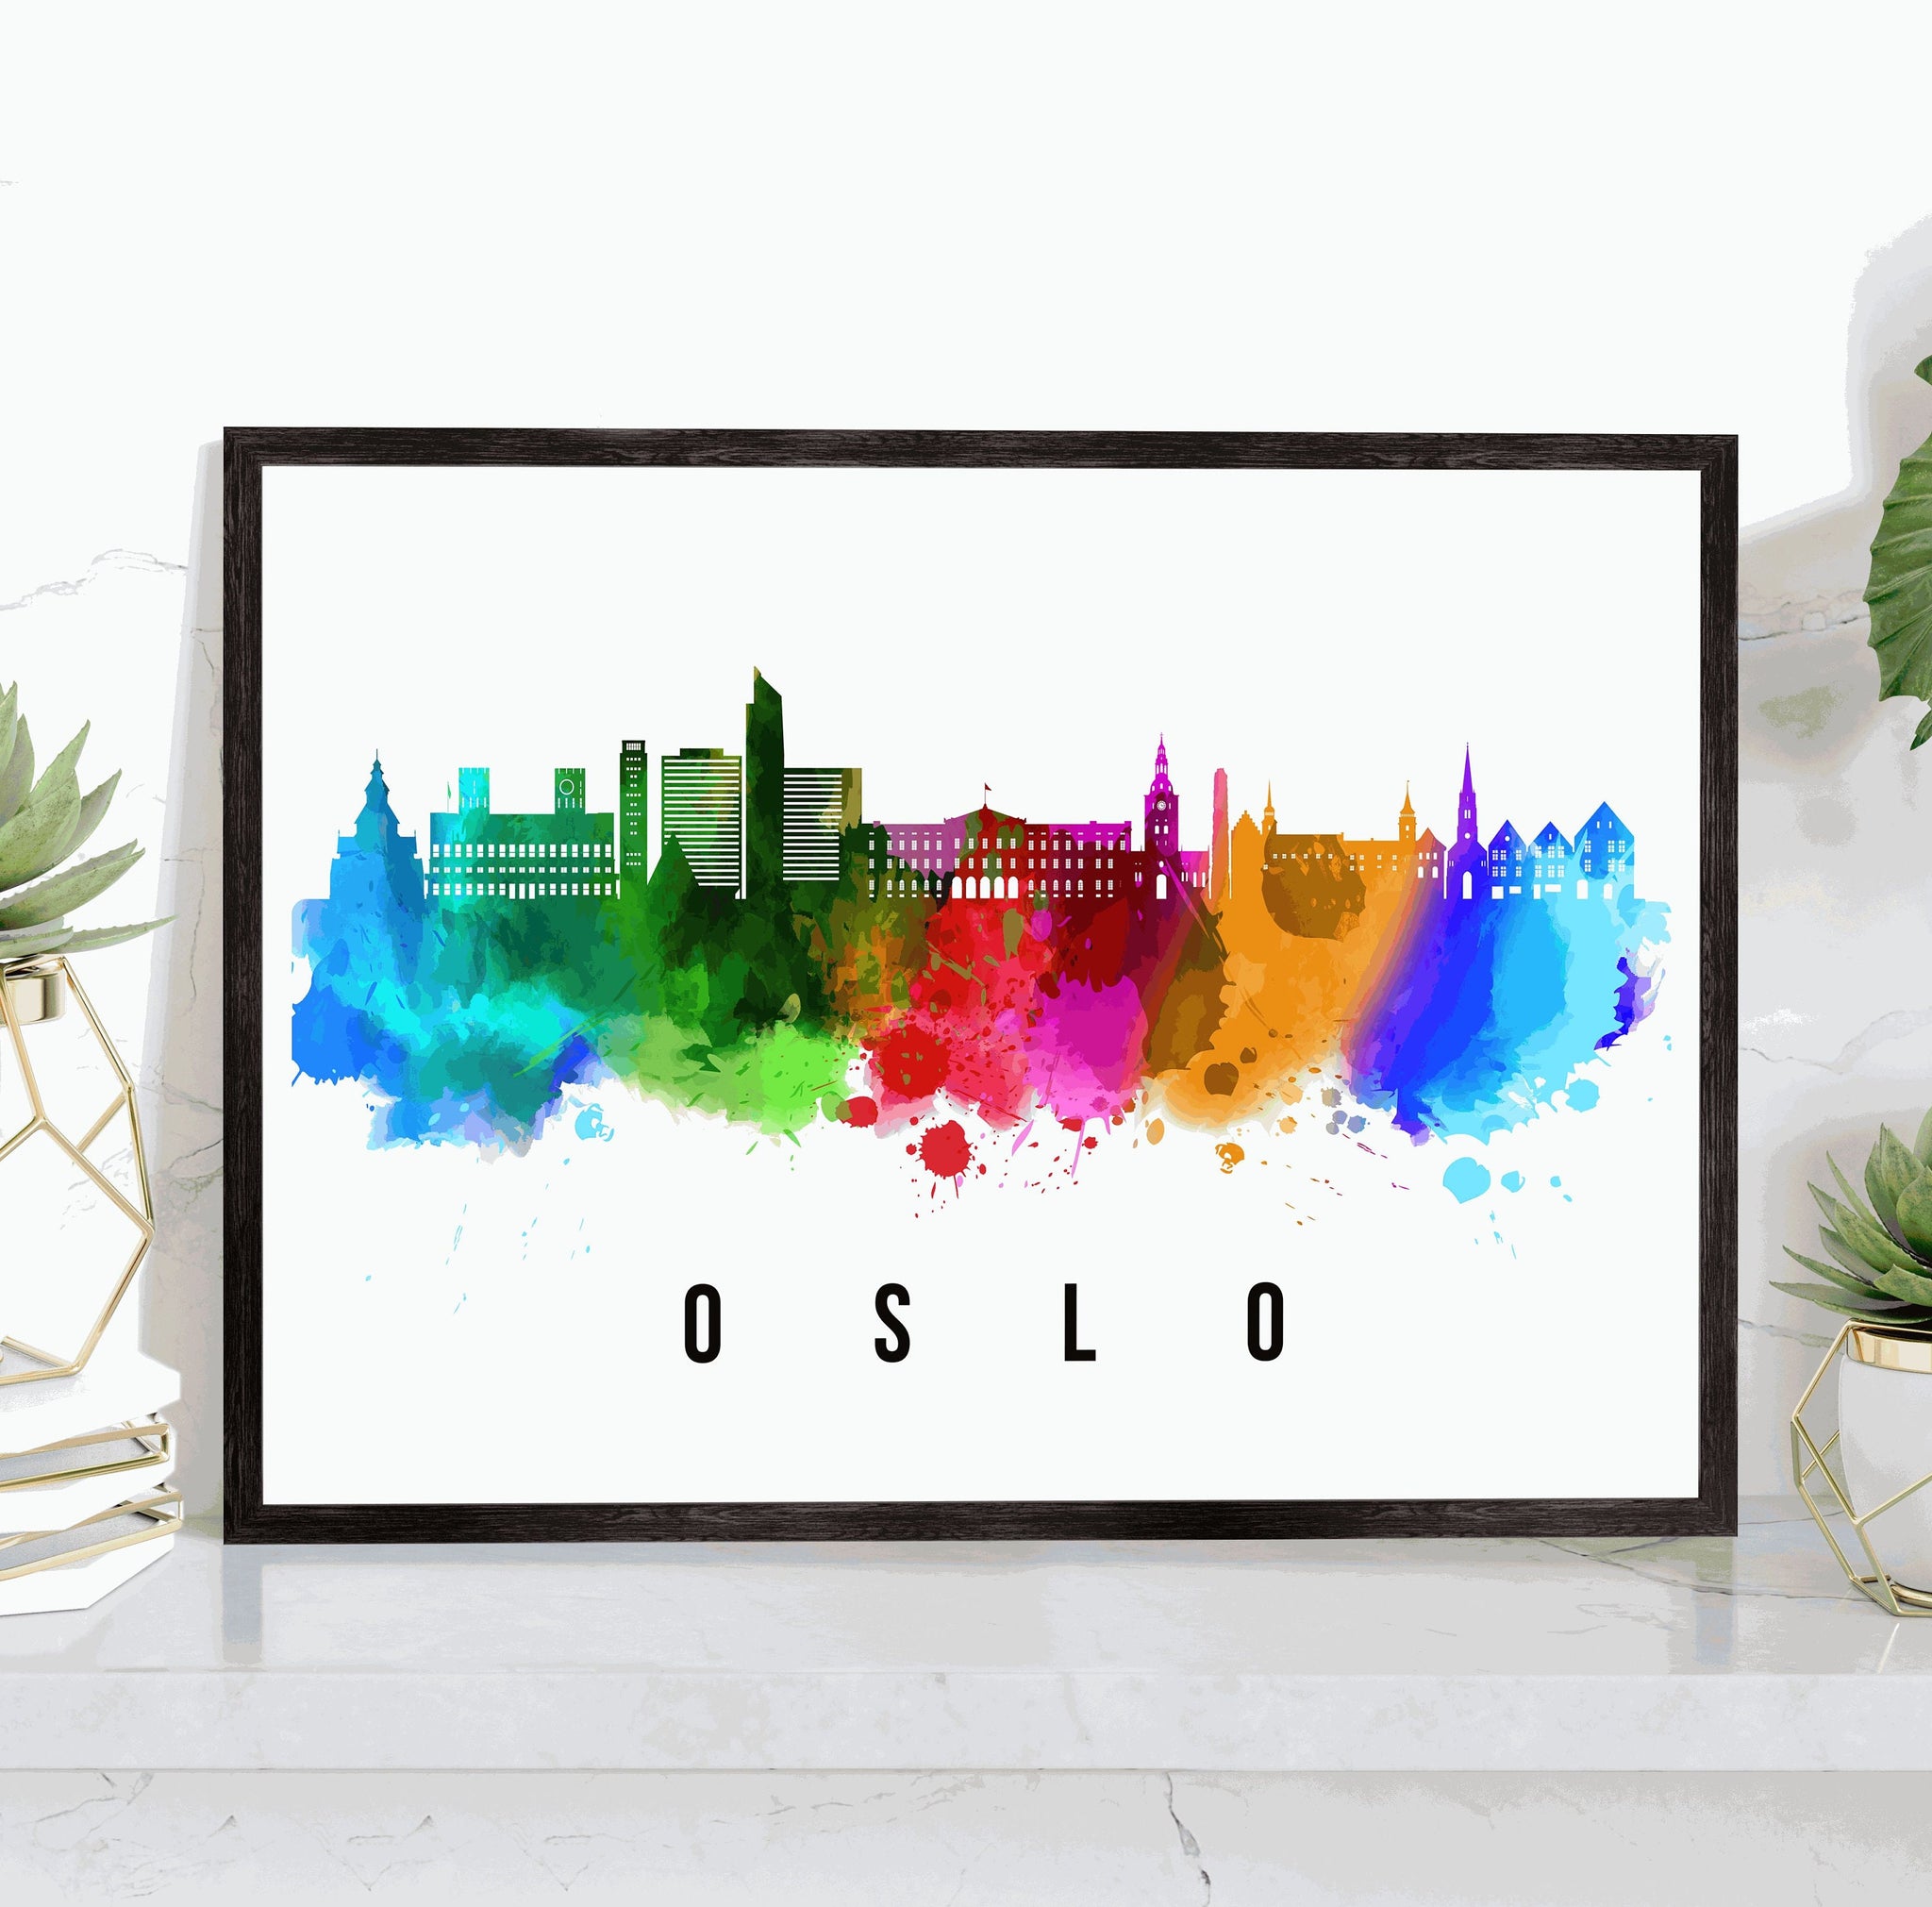 OSLO - NORWAY Poster, Skyline Poster Cityscape and Landmark Oslo City Illustration Home Wall Art, Office Decor